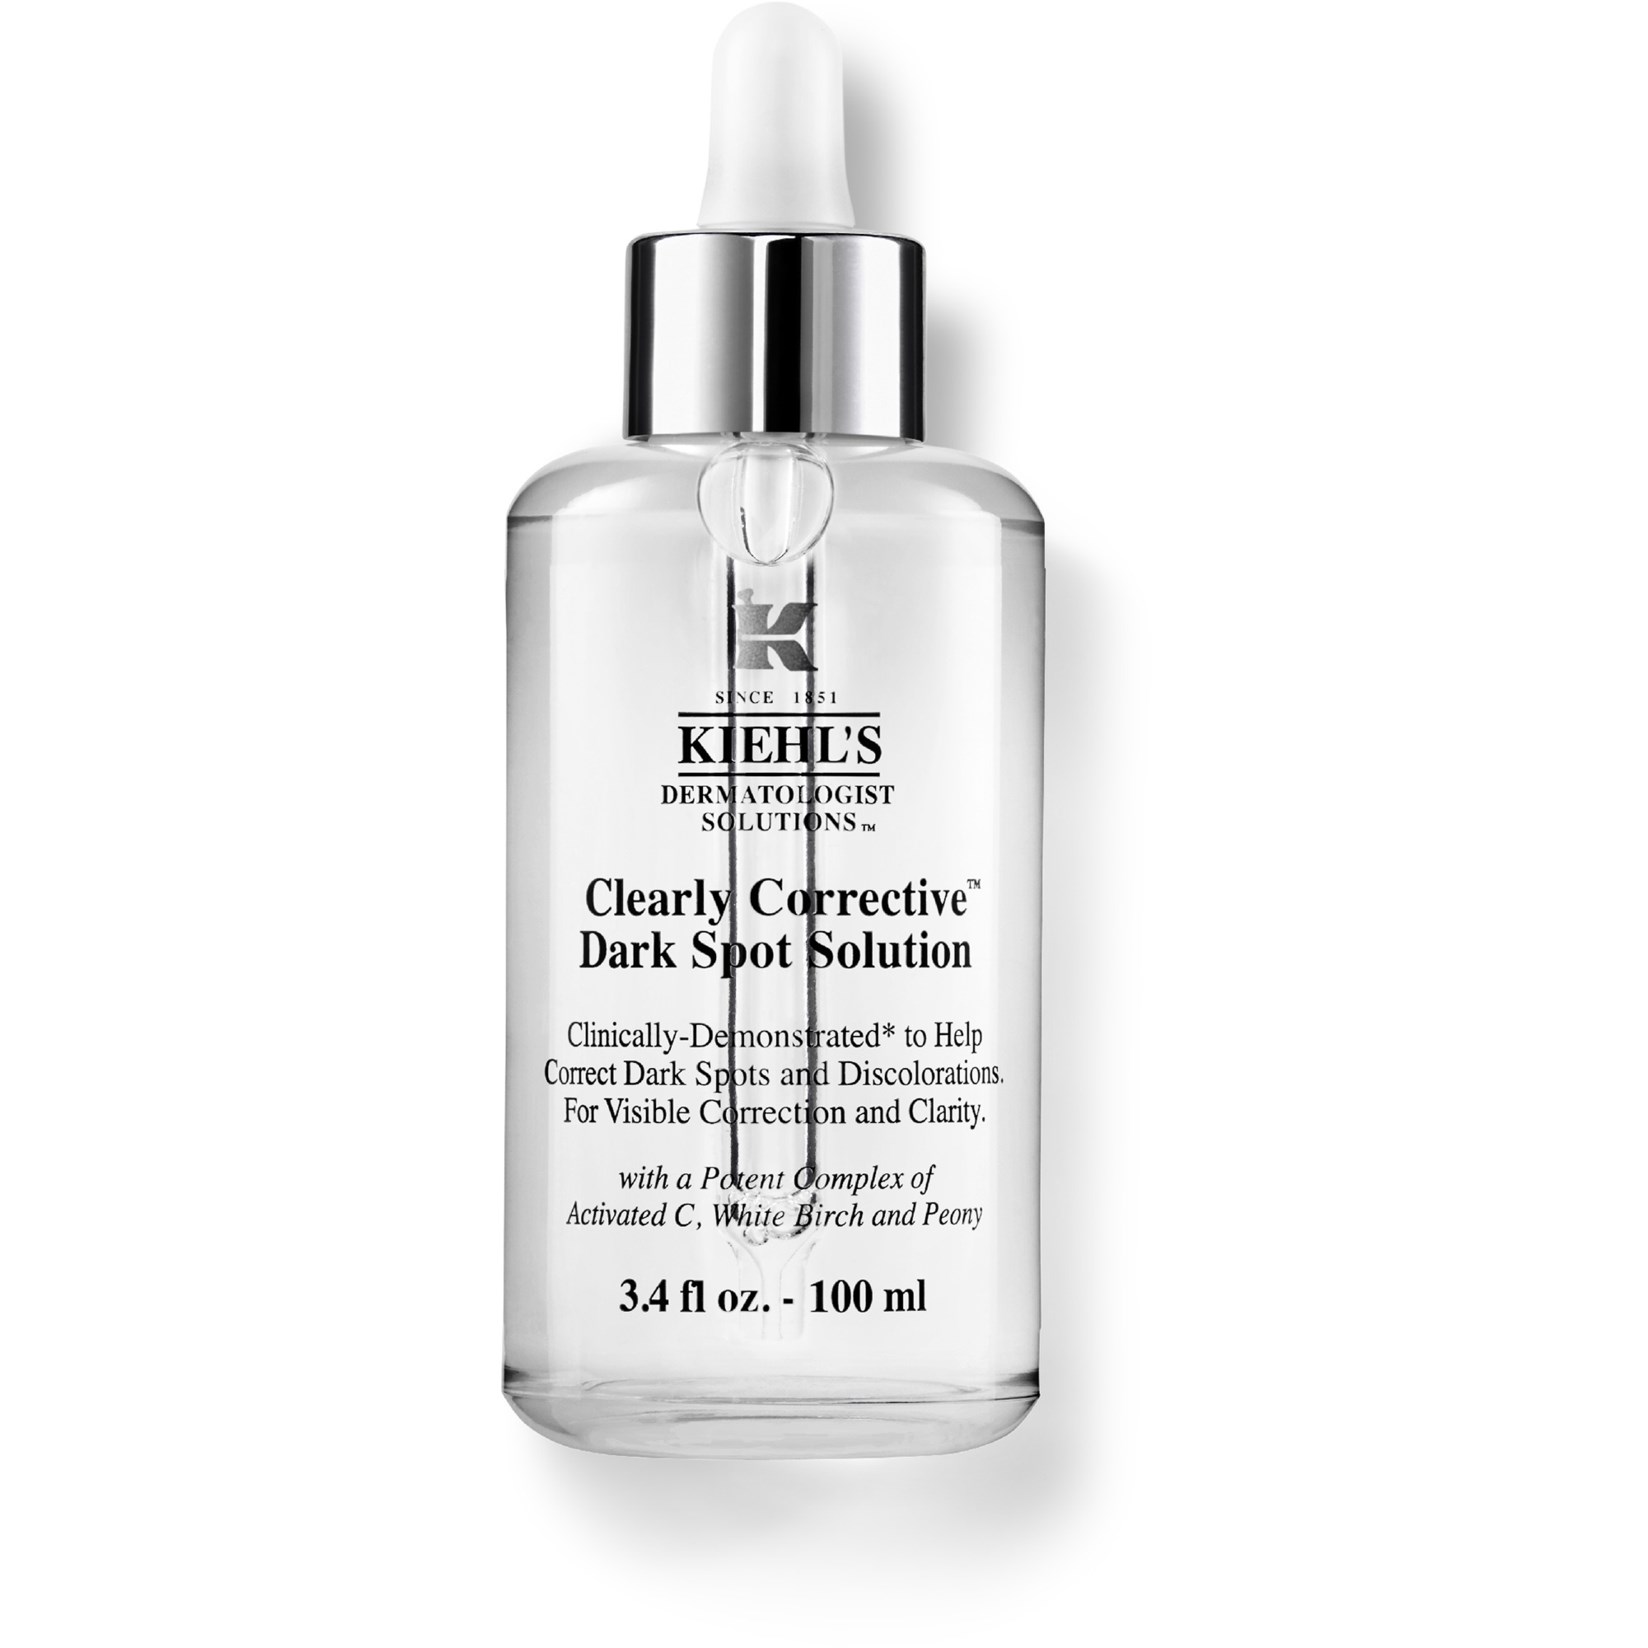 Kiehls Dermatologist Solutions Clearly Corrective Dark Spot Solution